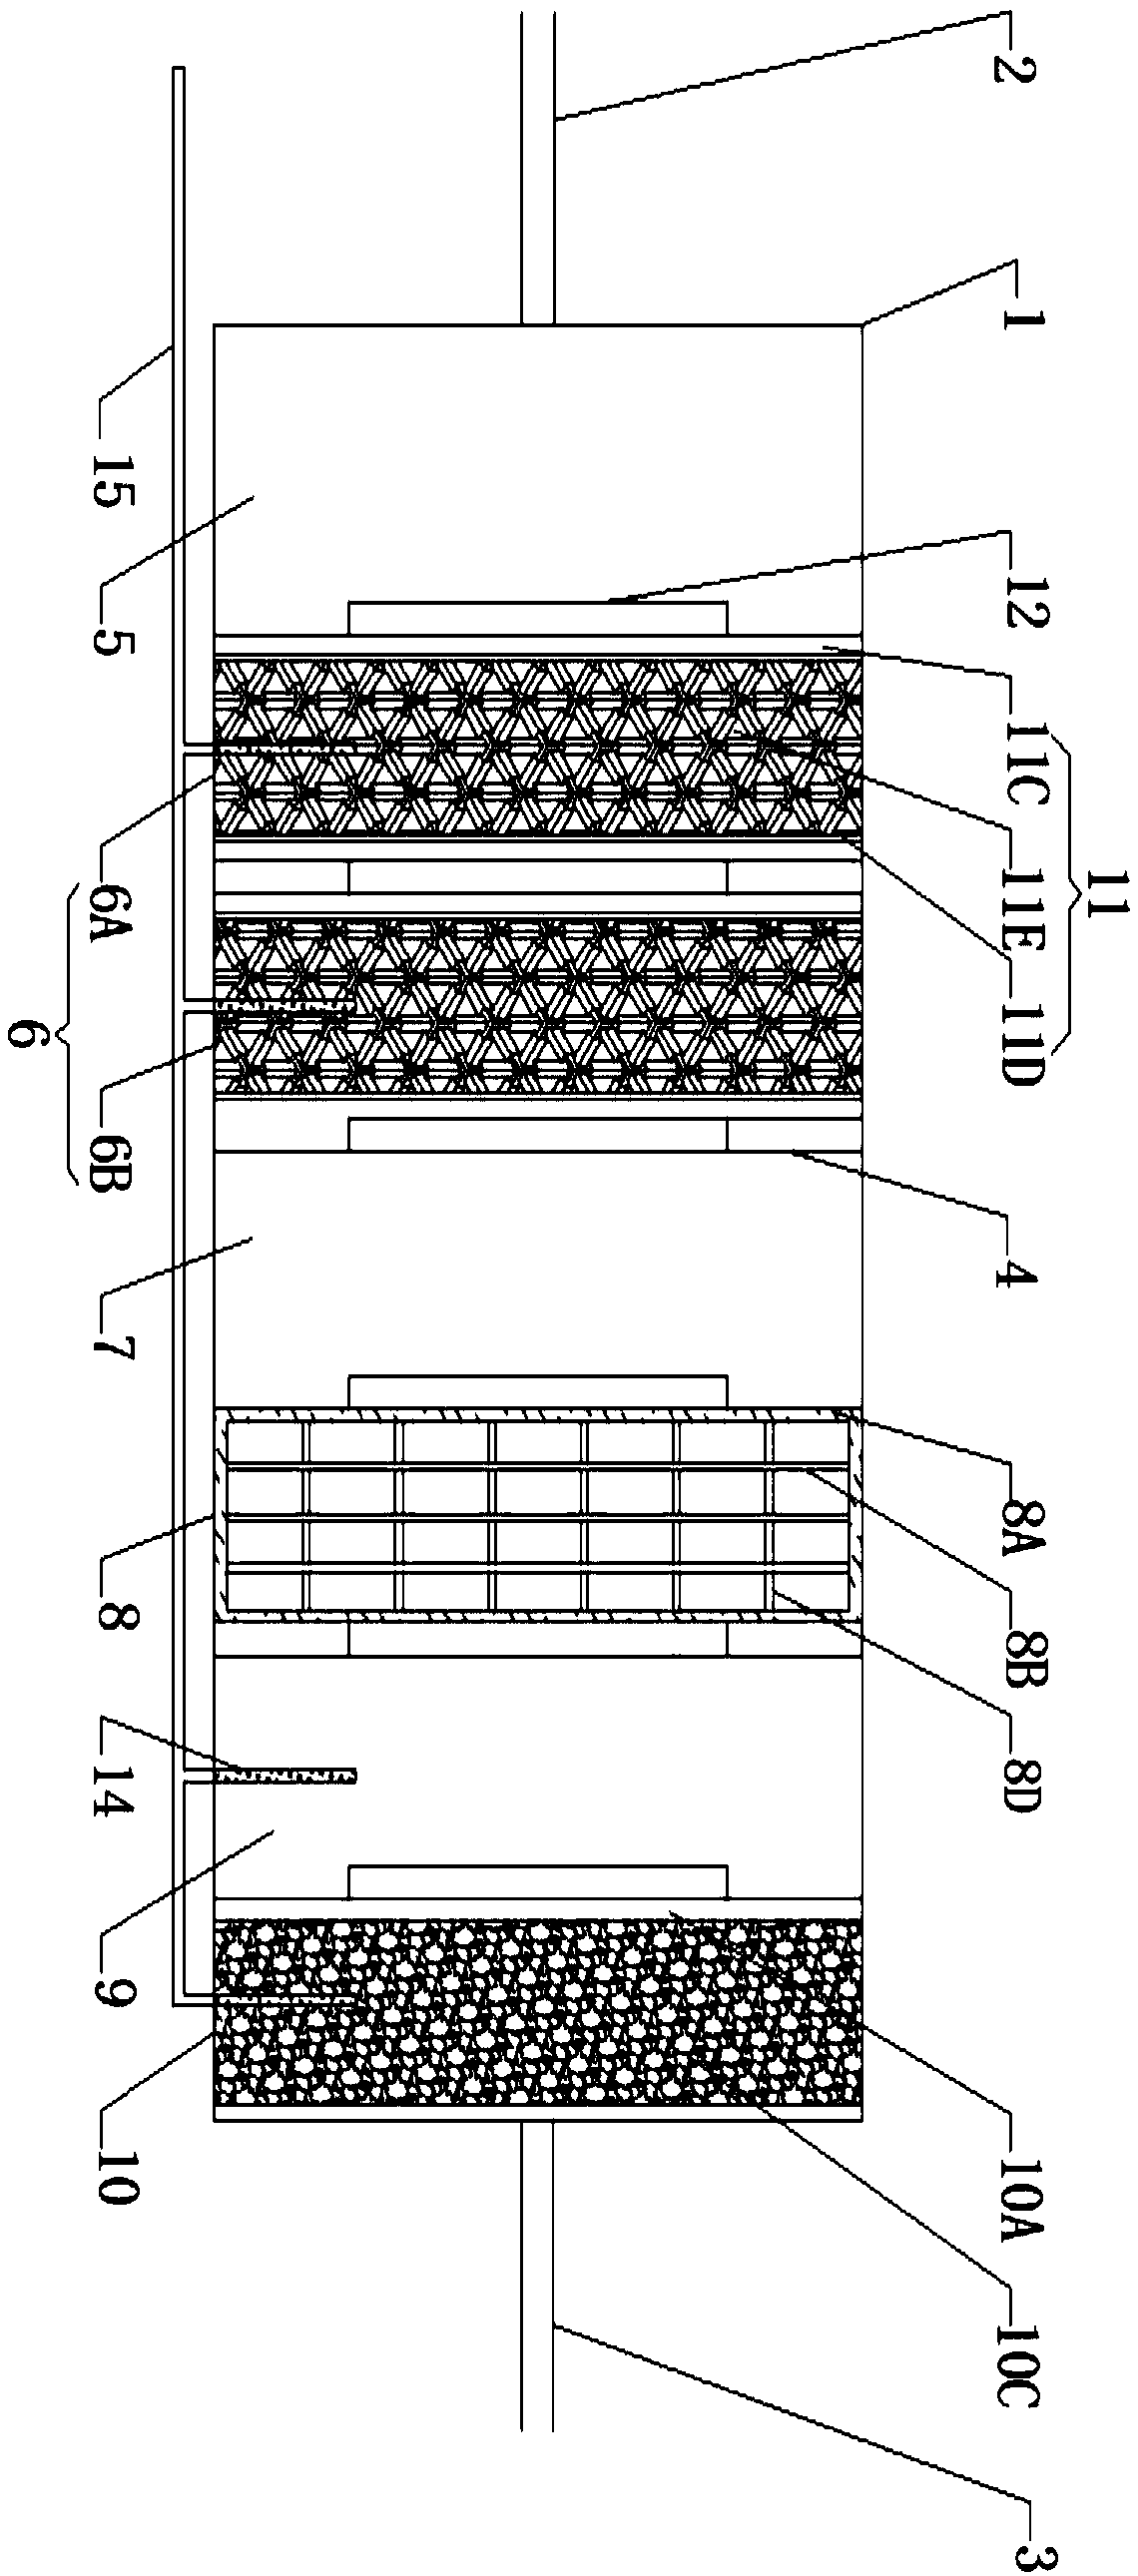 Integrated fumaric acid wastewater treatment device